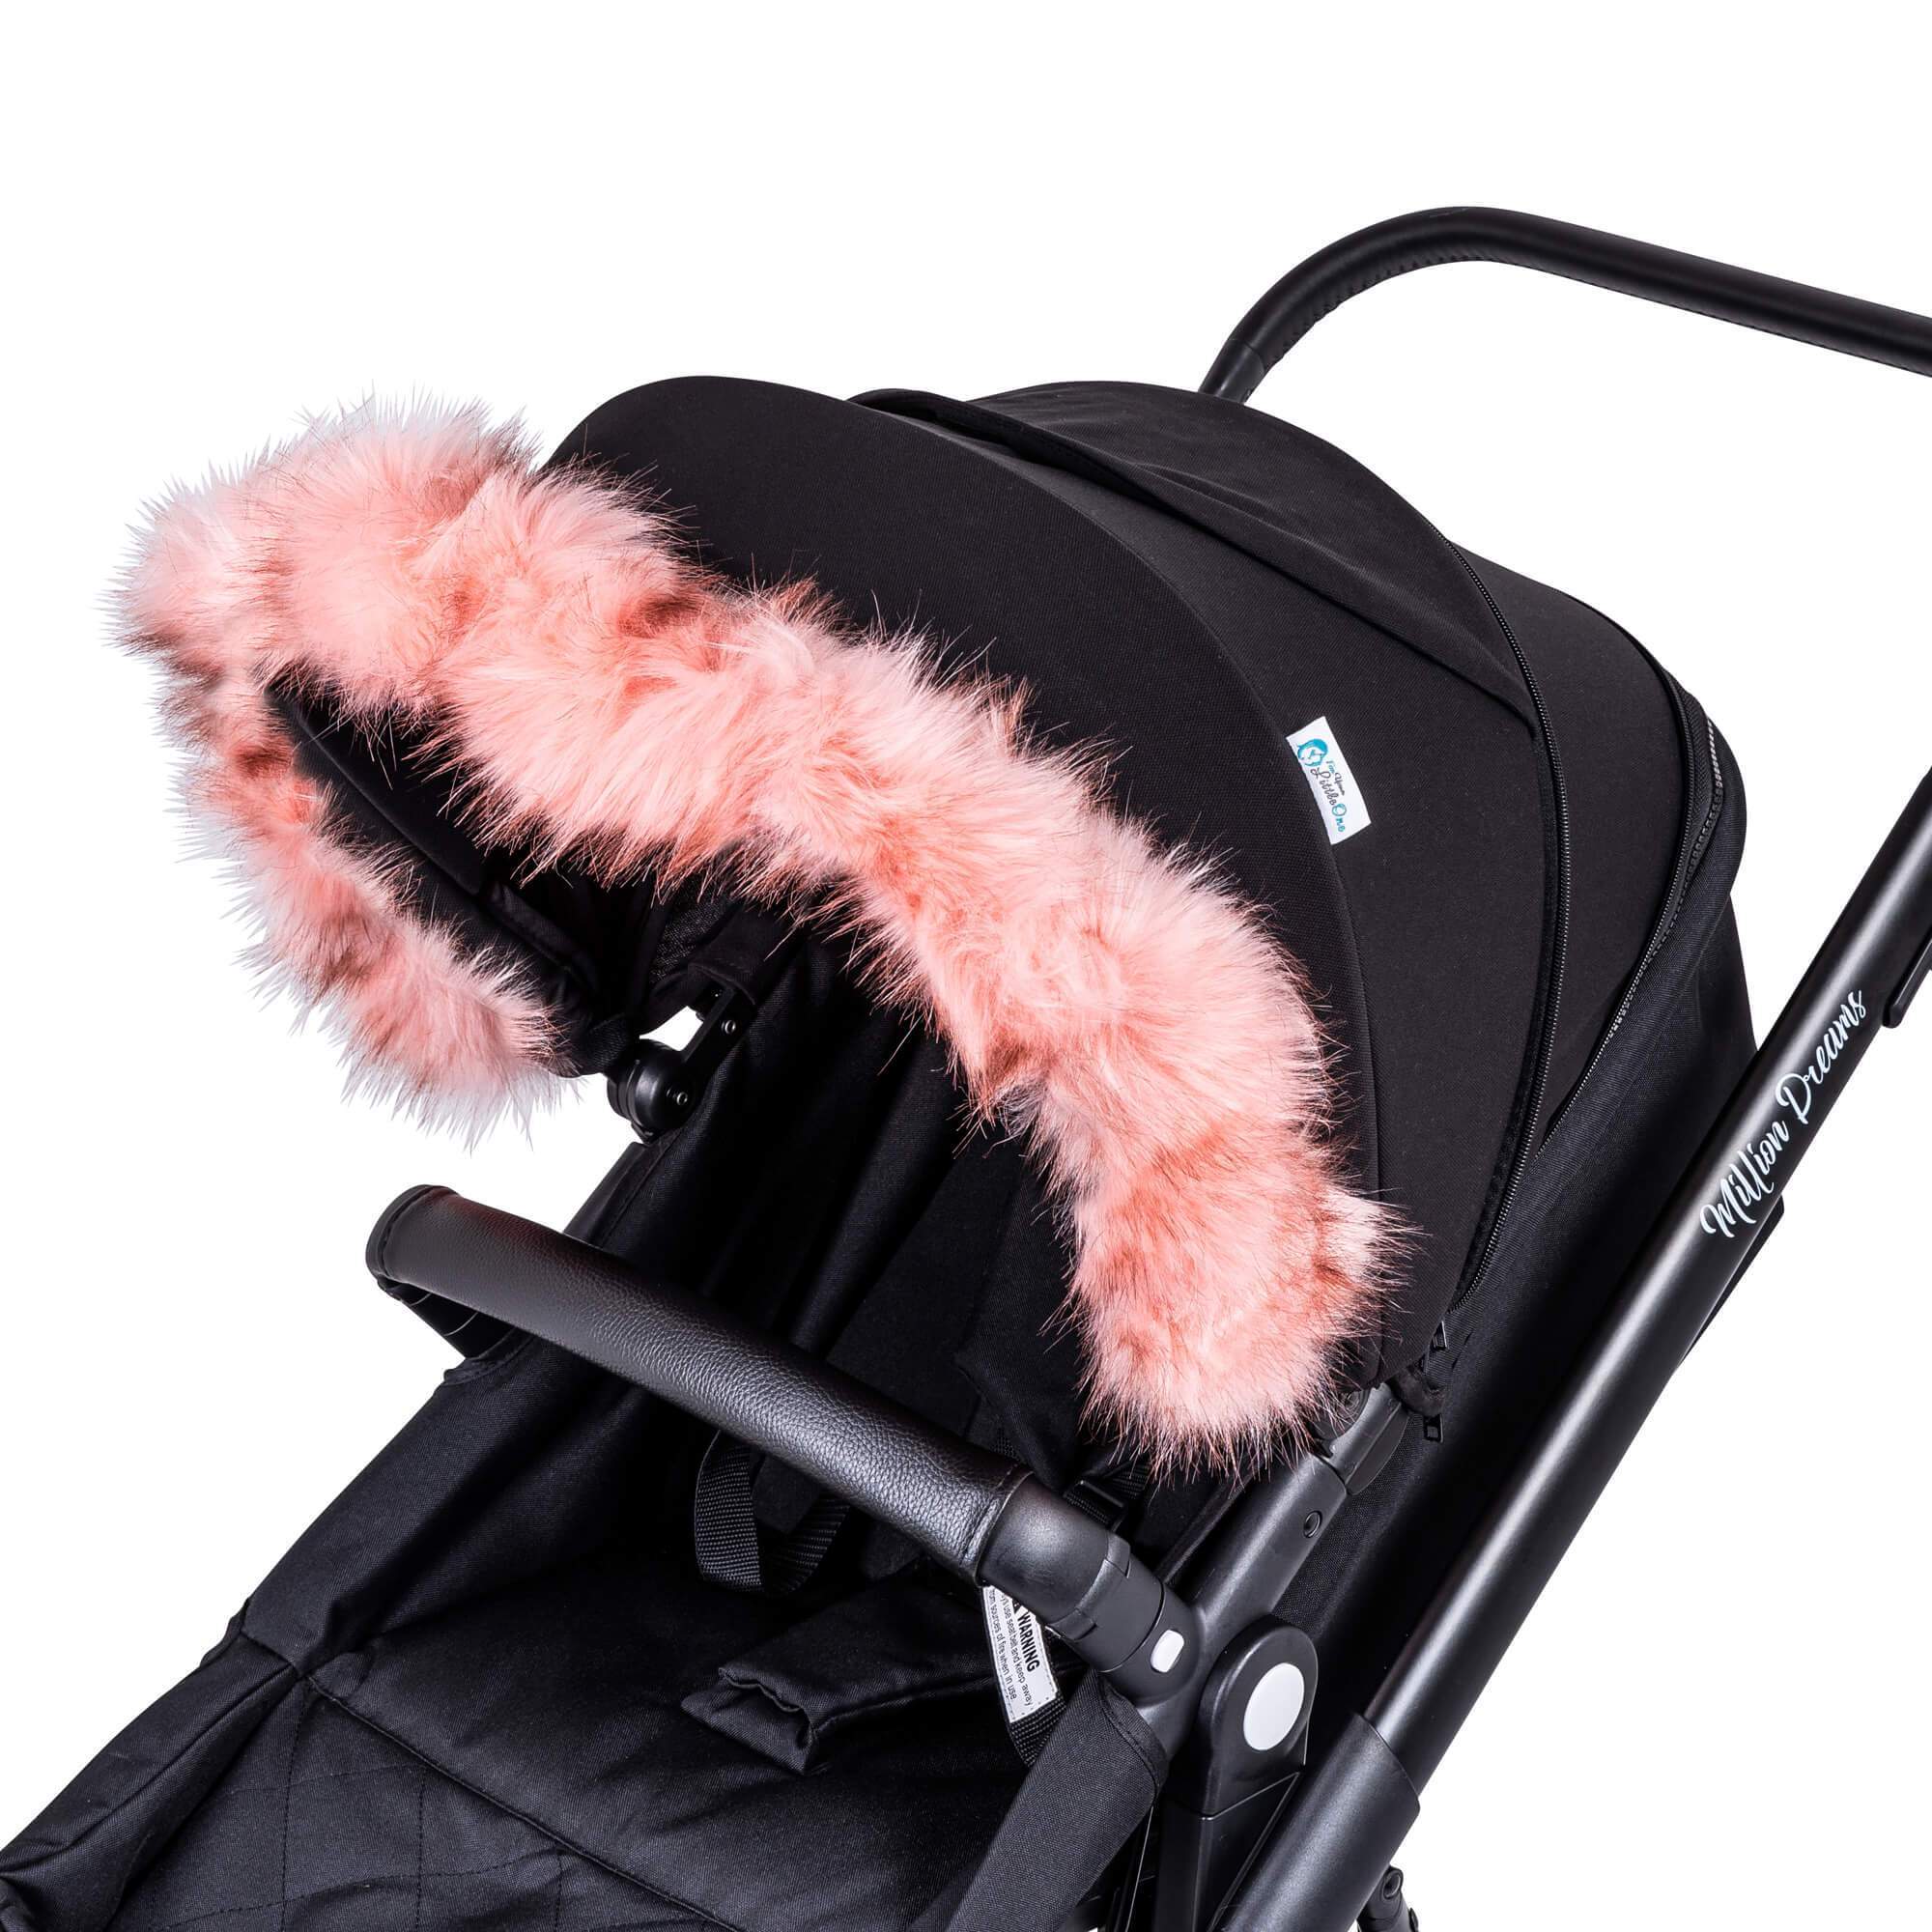 Pram Fur Hood Trim Attachment for Pushchair Compatible with NeoNato - For Your Little One